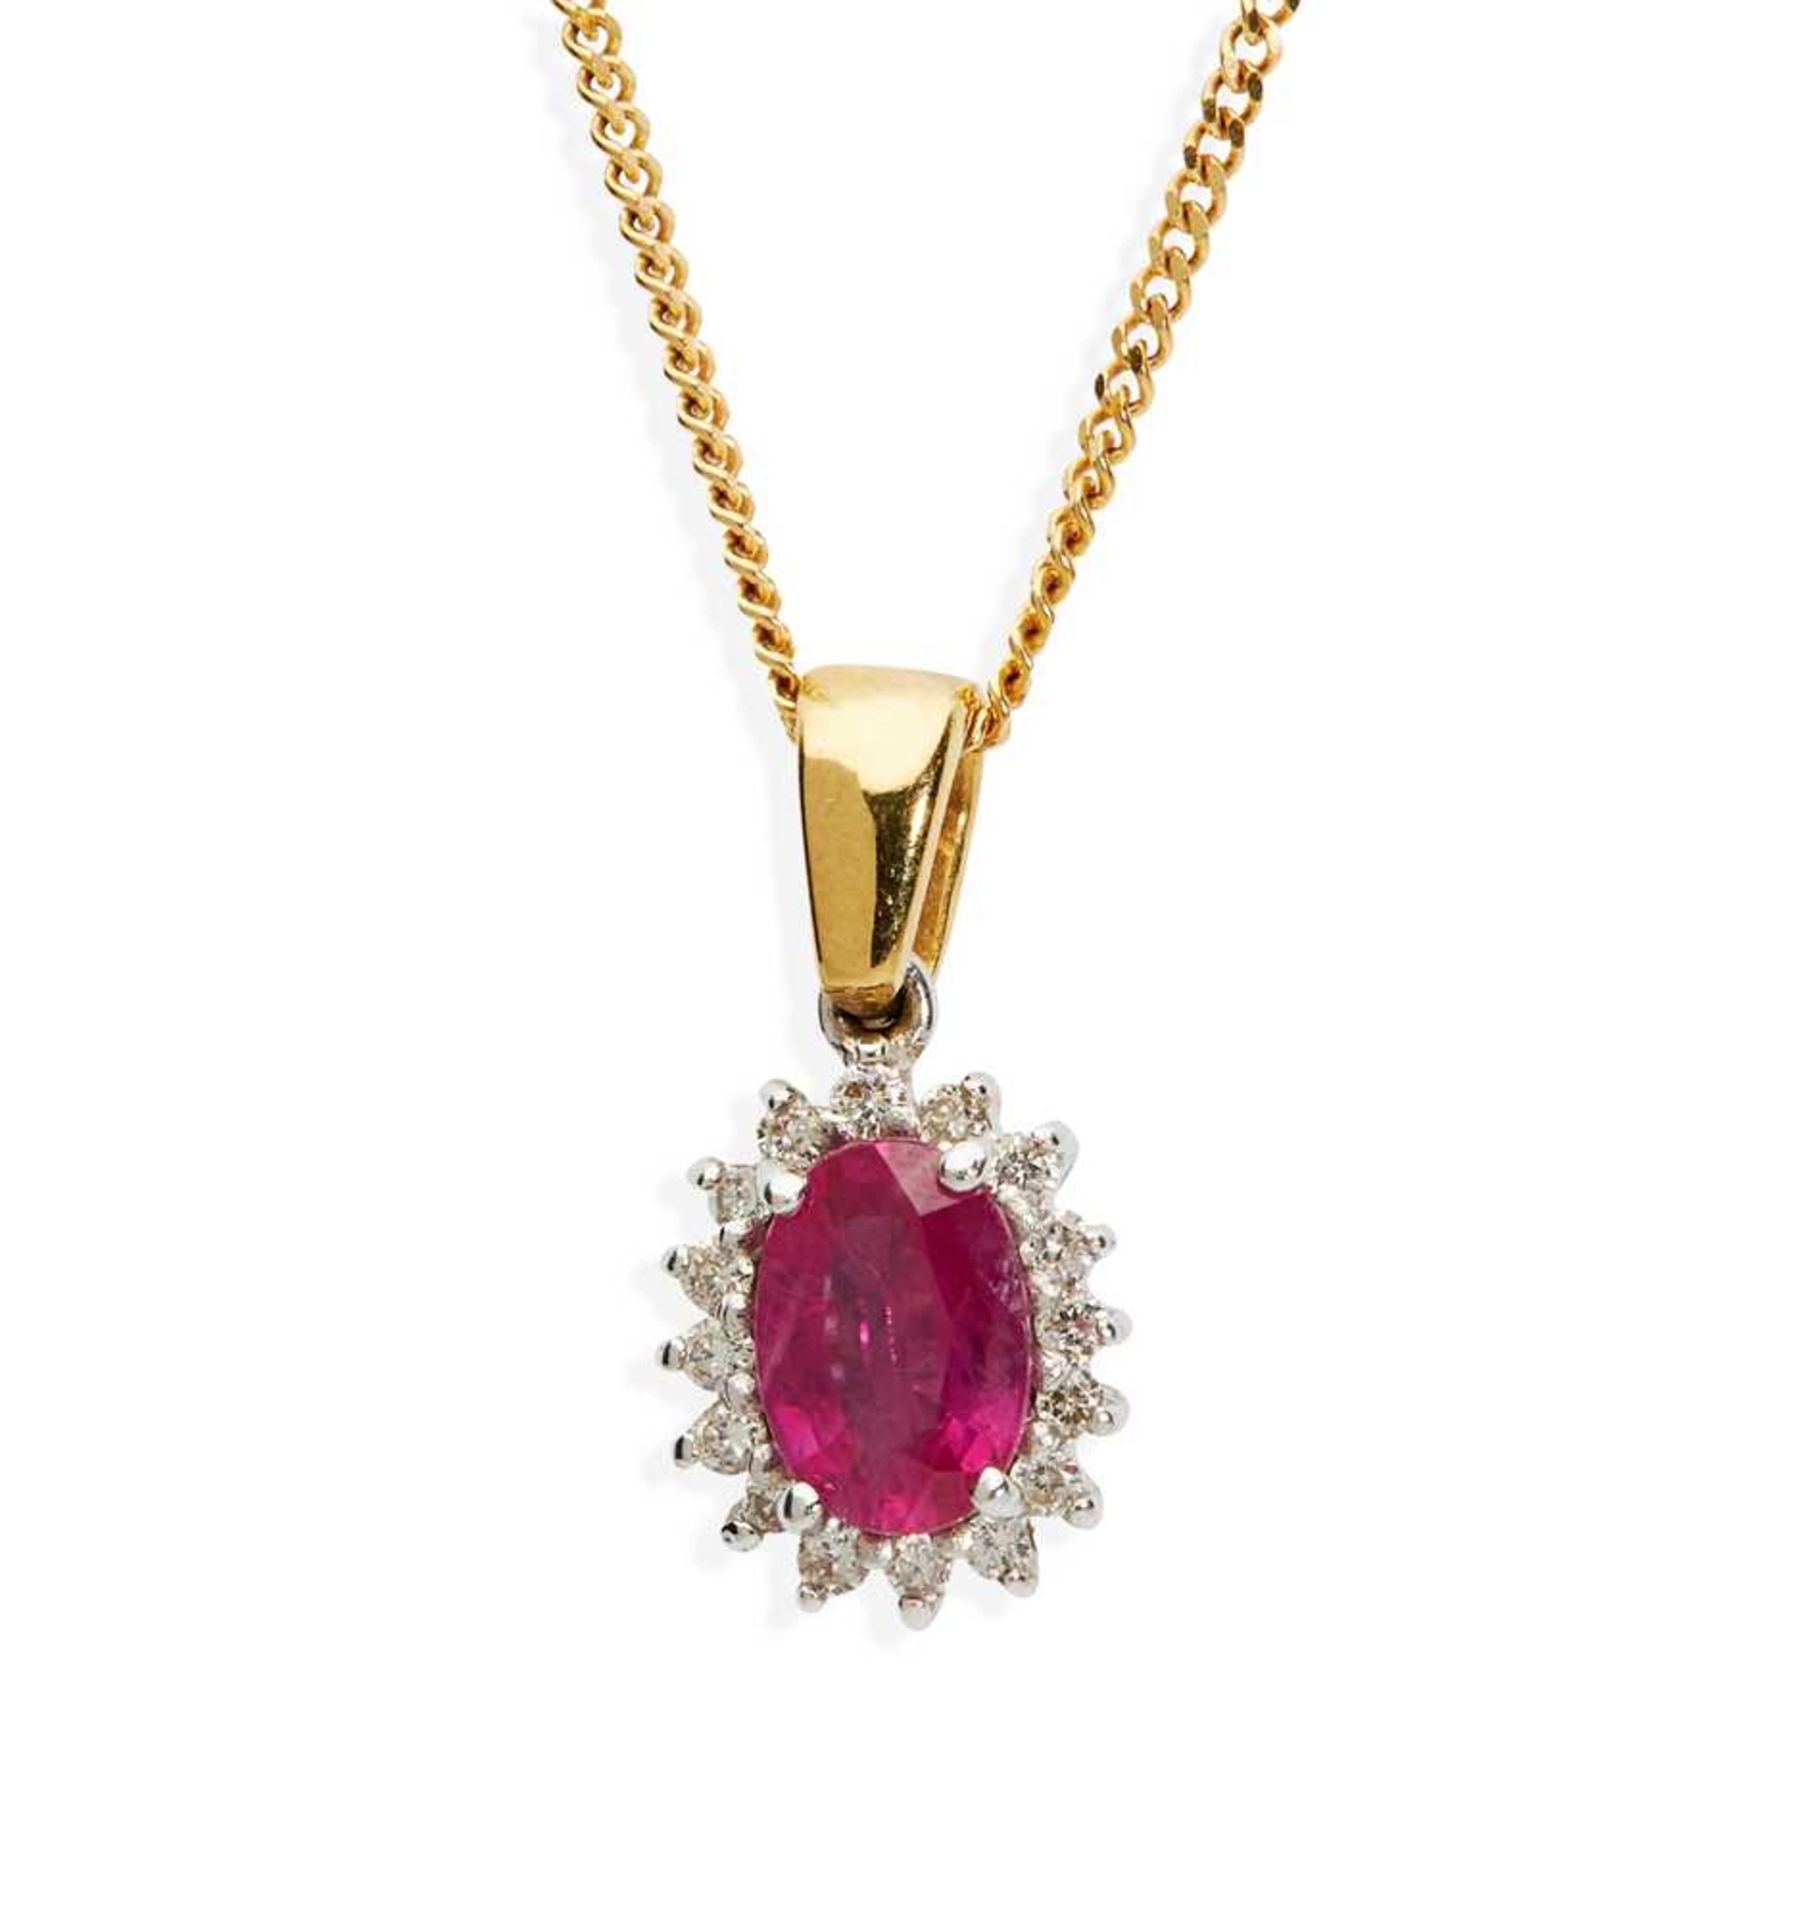 A pink sapphire and diamond pendant necklace